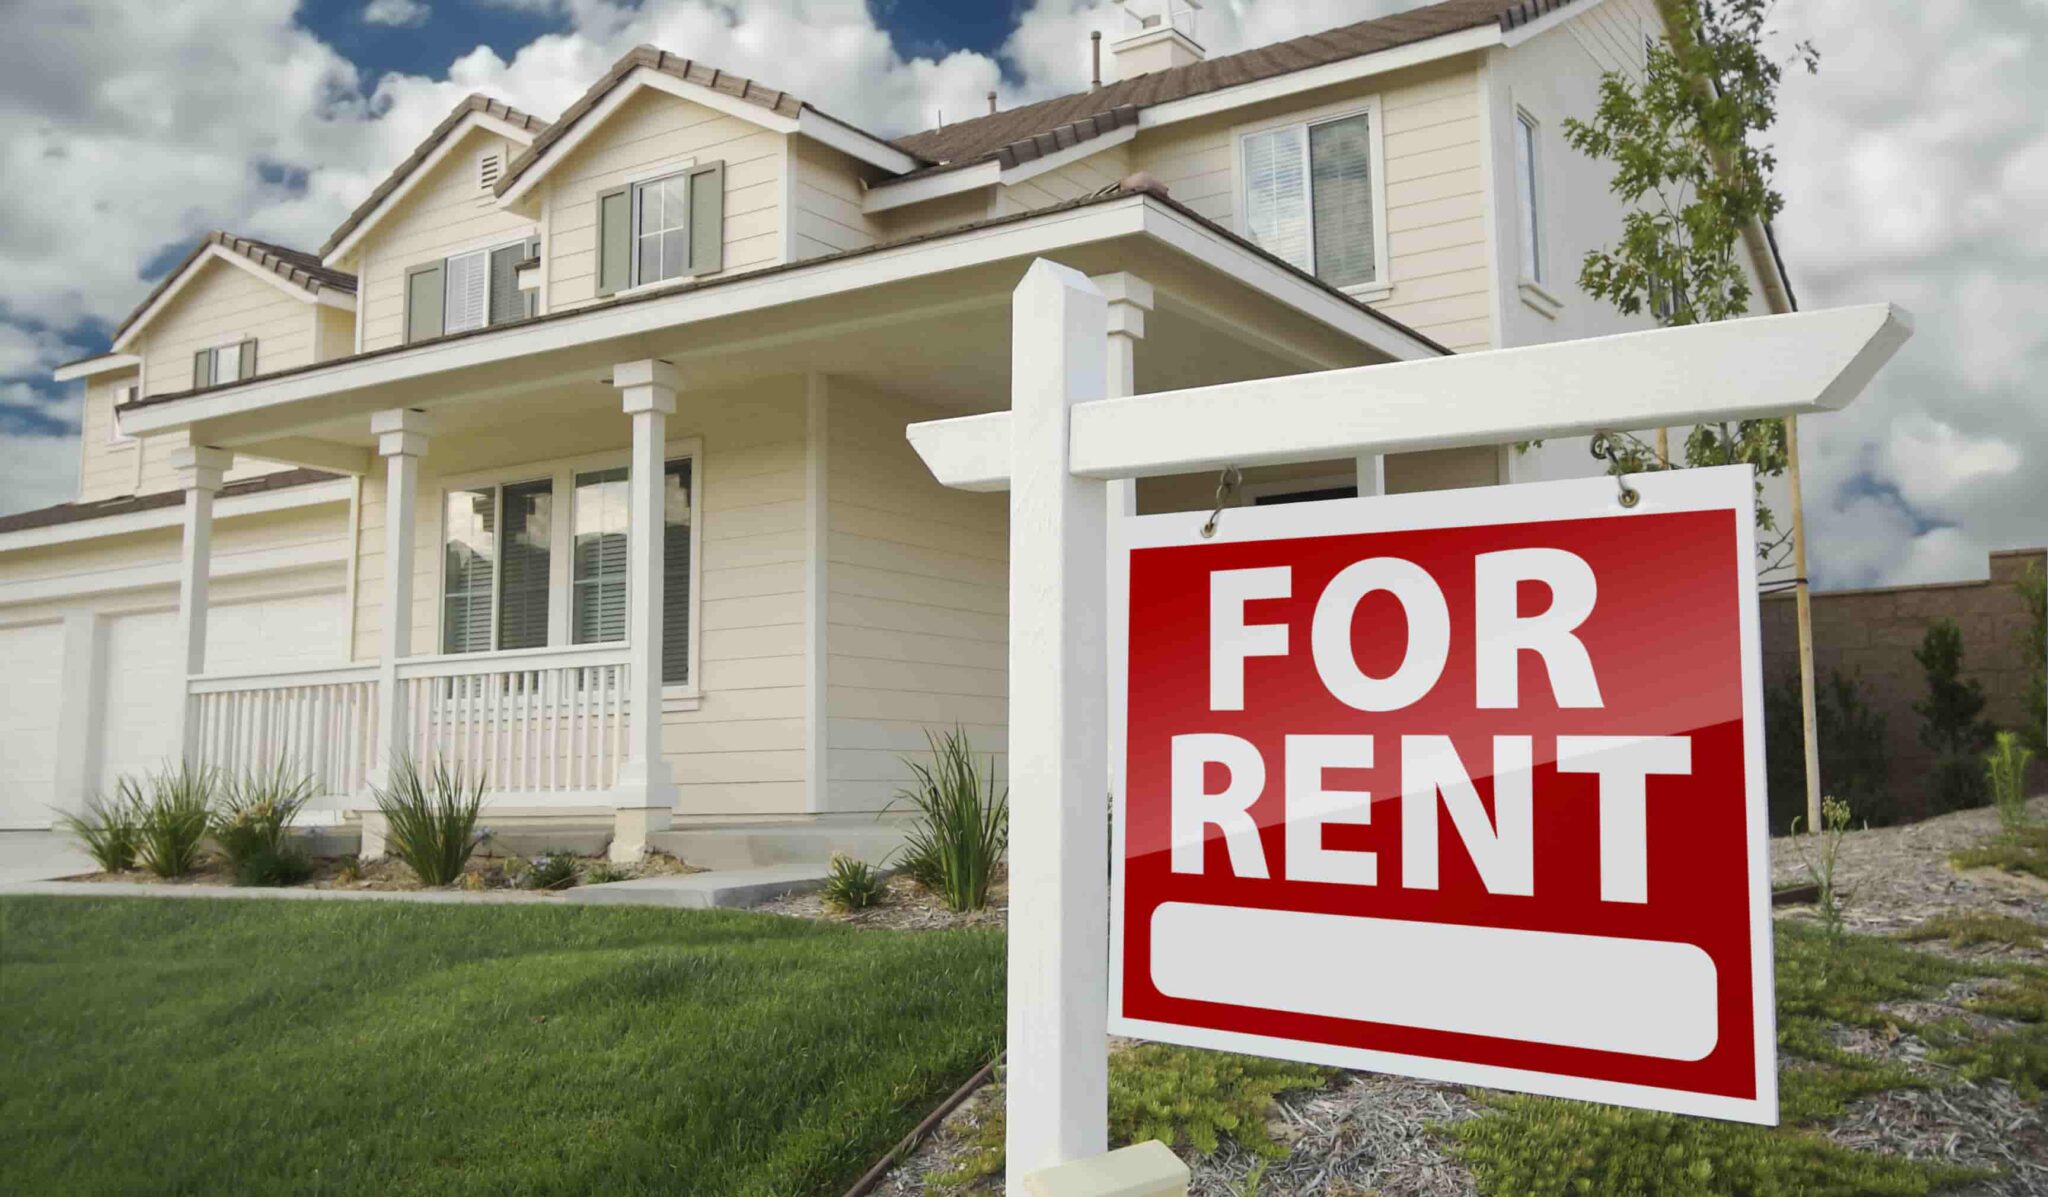 Interested in Buying Rental Properties? Here’s What You Need to Know